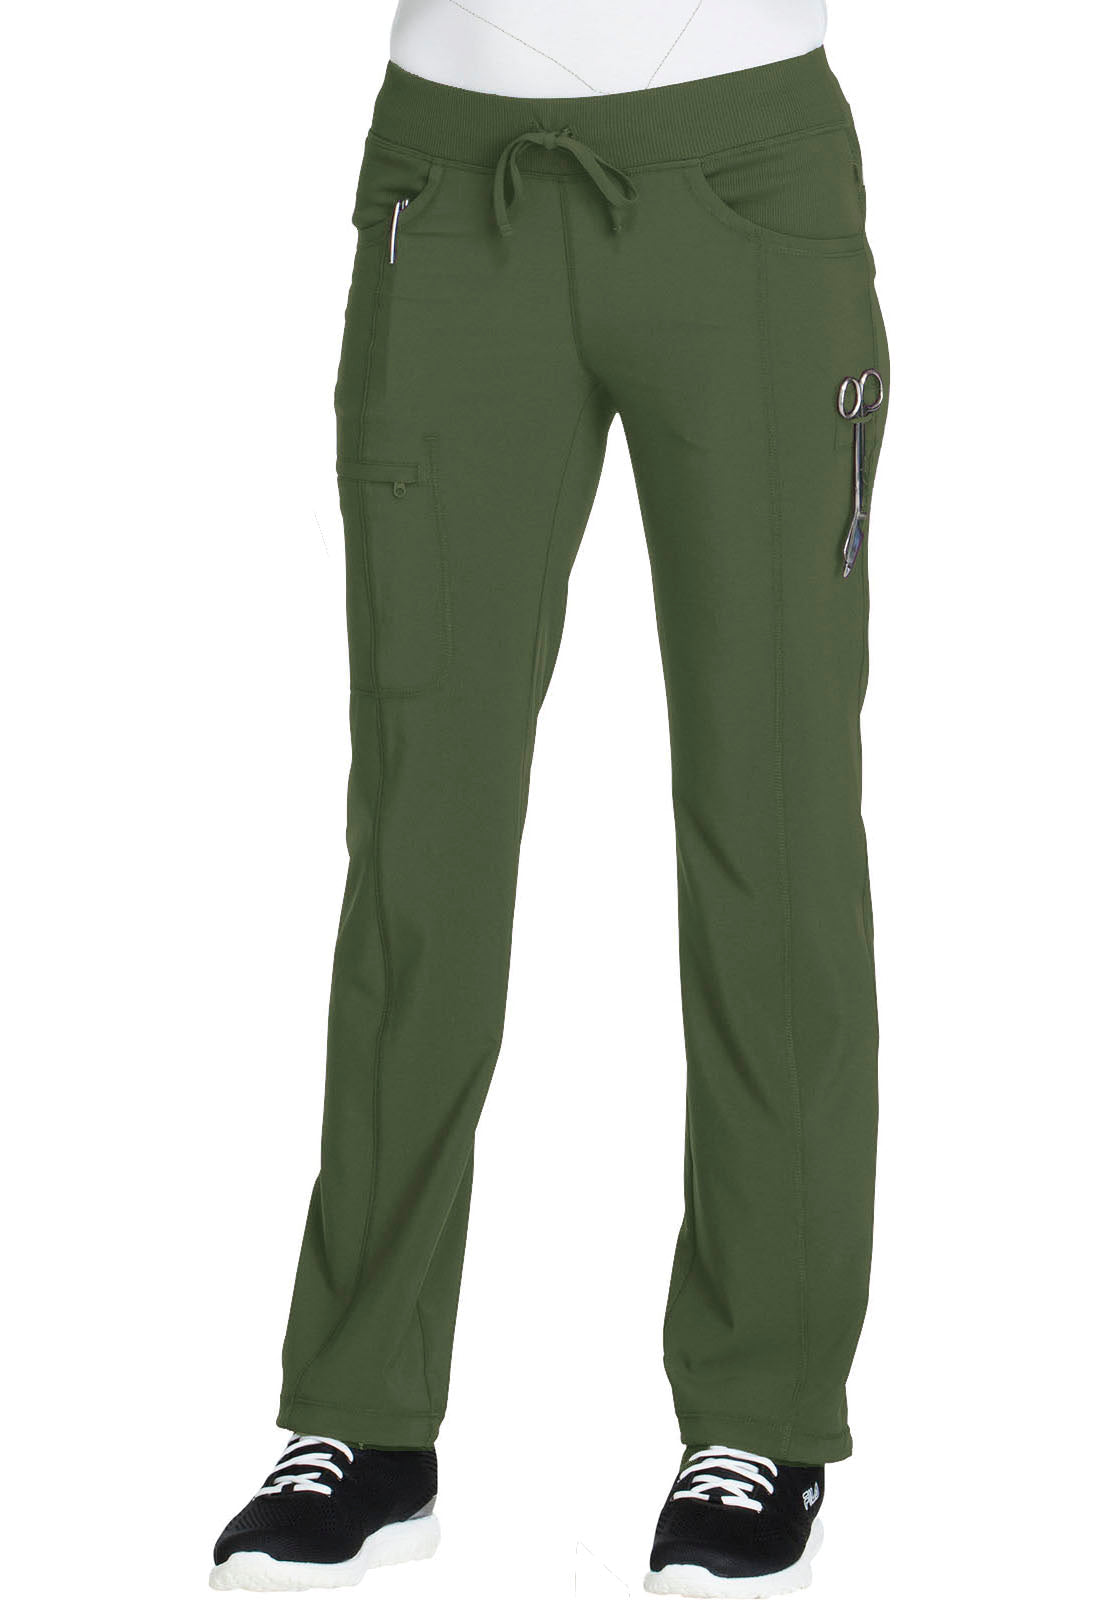 SVH - Physical Therapy - 1123A Olive Ladies Low Rise Straight Leg Drawstring Pant